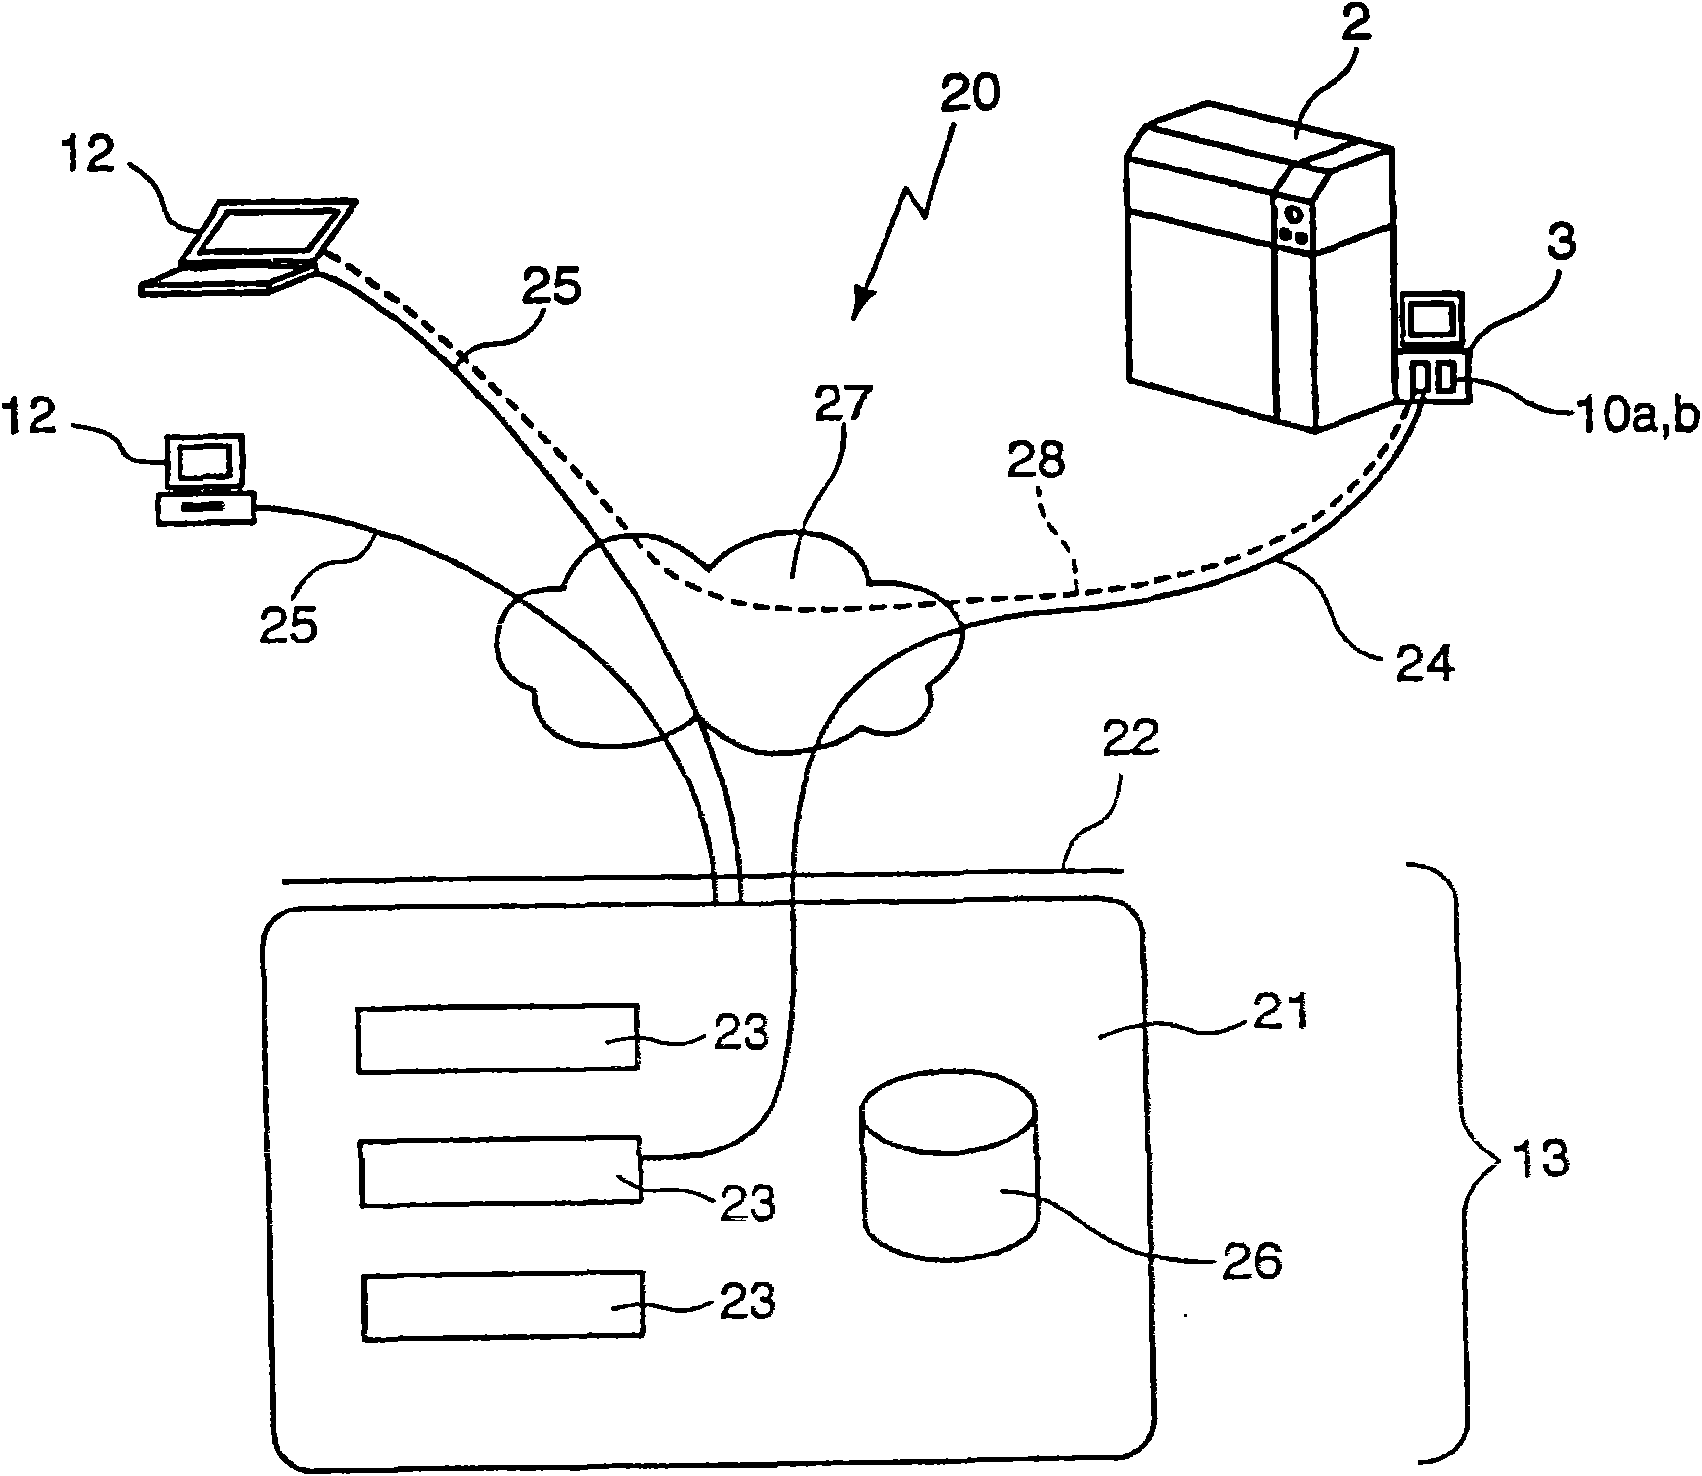 Apparatus for controlling a machine, and remote communication system